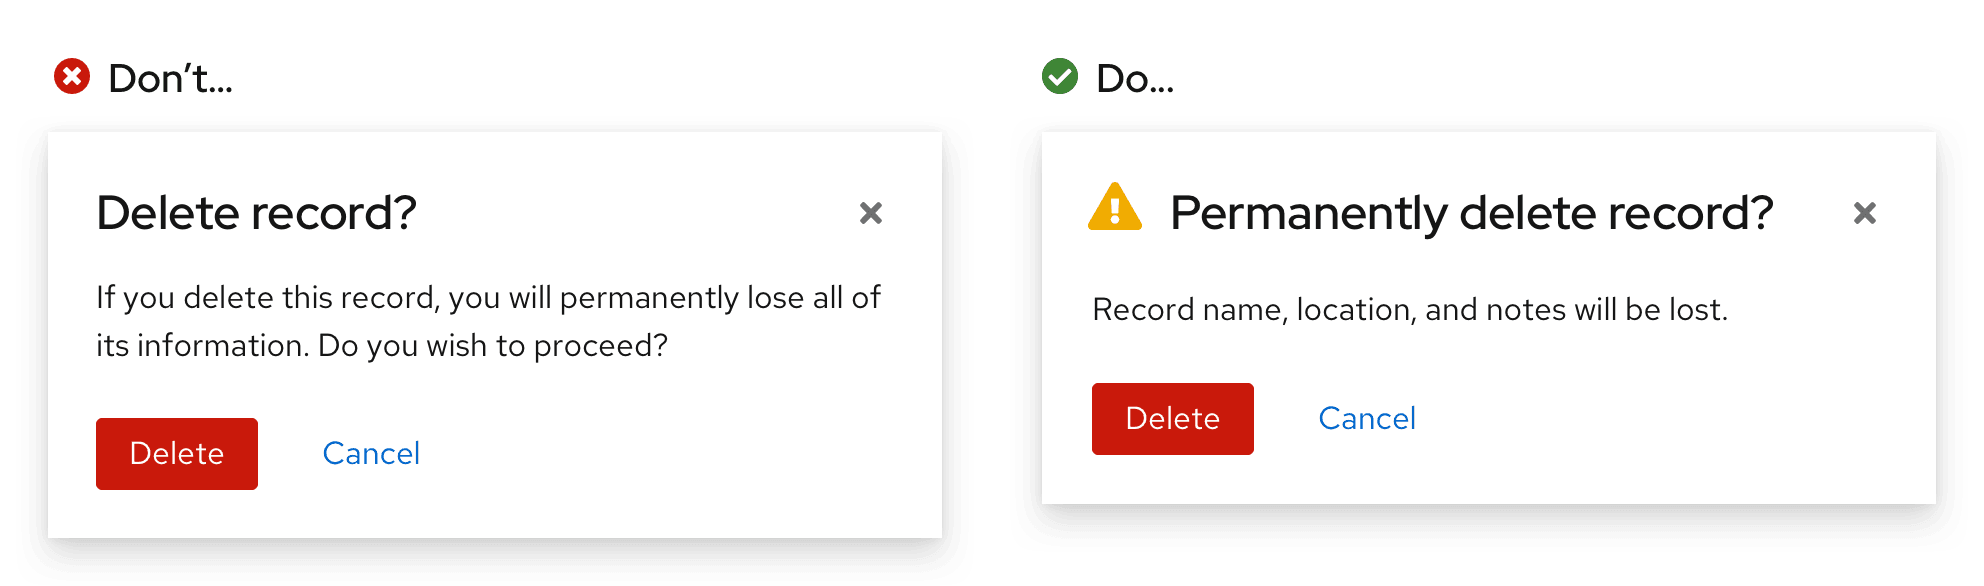 A side-by-side comparison of unsuccessful and successful destructive confirmaton dialogs for deleting a record. The successful dialog explains the consequence of deleting this record: Record name, location, and notes will be lost